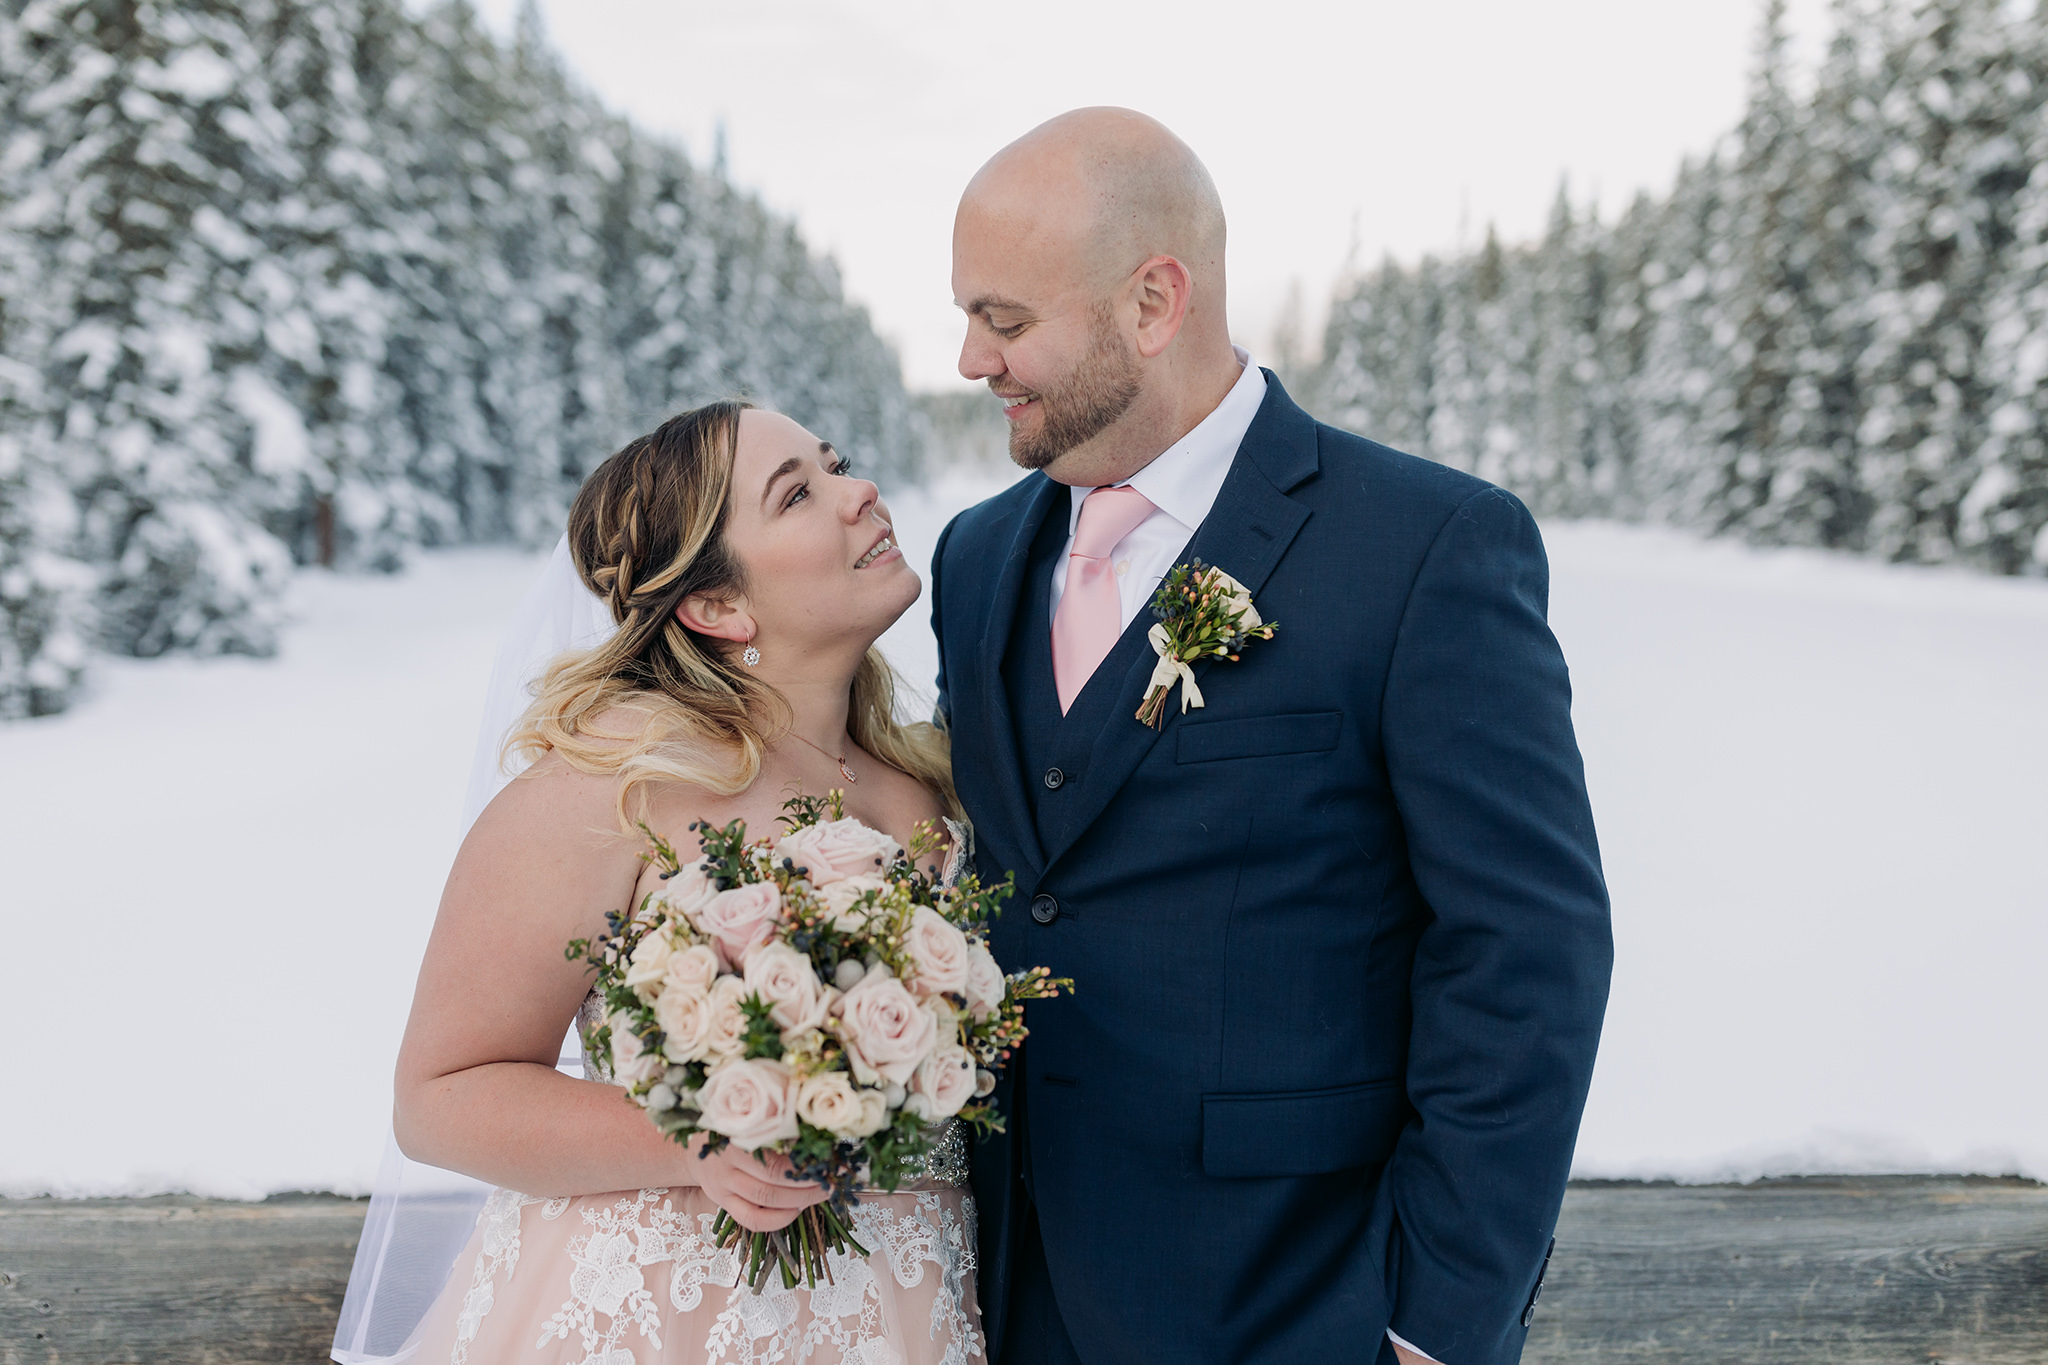 Lake Louise winter elopement on frozen Lake Louise with Bride in pink wedding dress in winter wonderland on the Bow Valley Parkway in Banff National Park photographed by ENV Photography